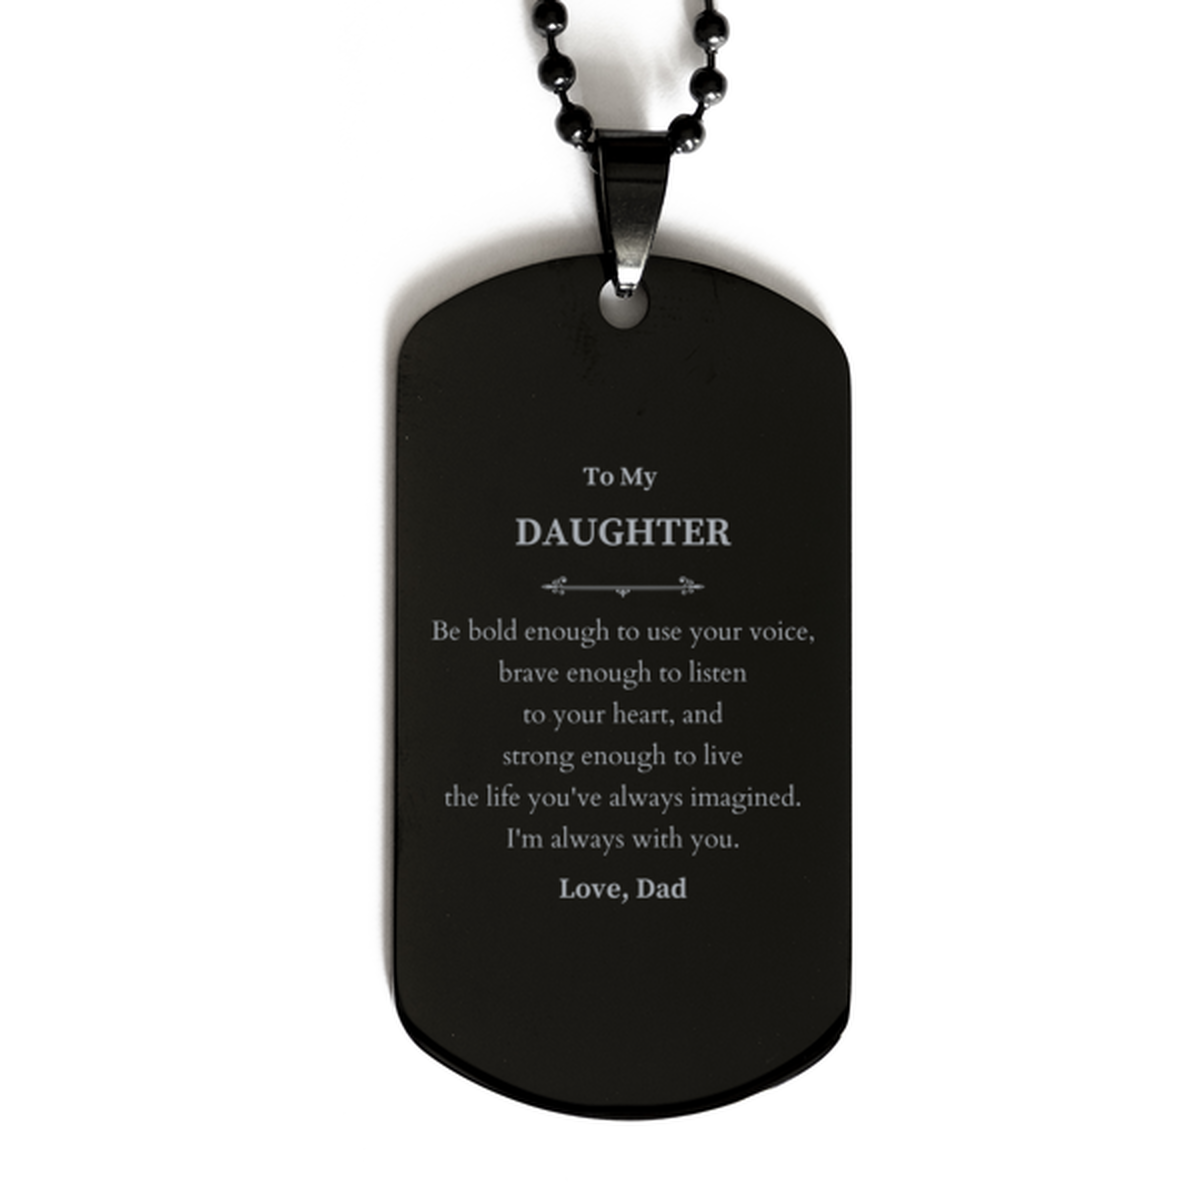 Keepsake Daughter Black Dog Tag Gift Idea Graduation Christmas Birthday Daughter from Dad, Daughter Be bold enough to use your voice, brave enough to listen to your heart. Love, Dad